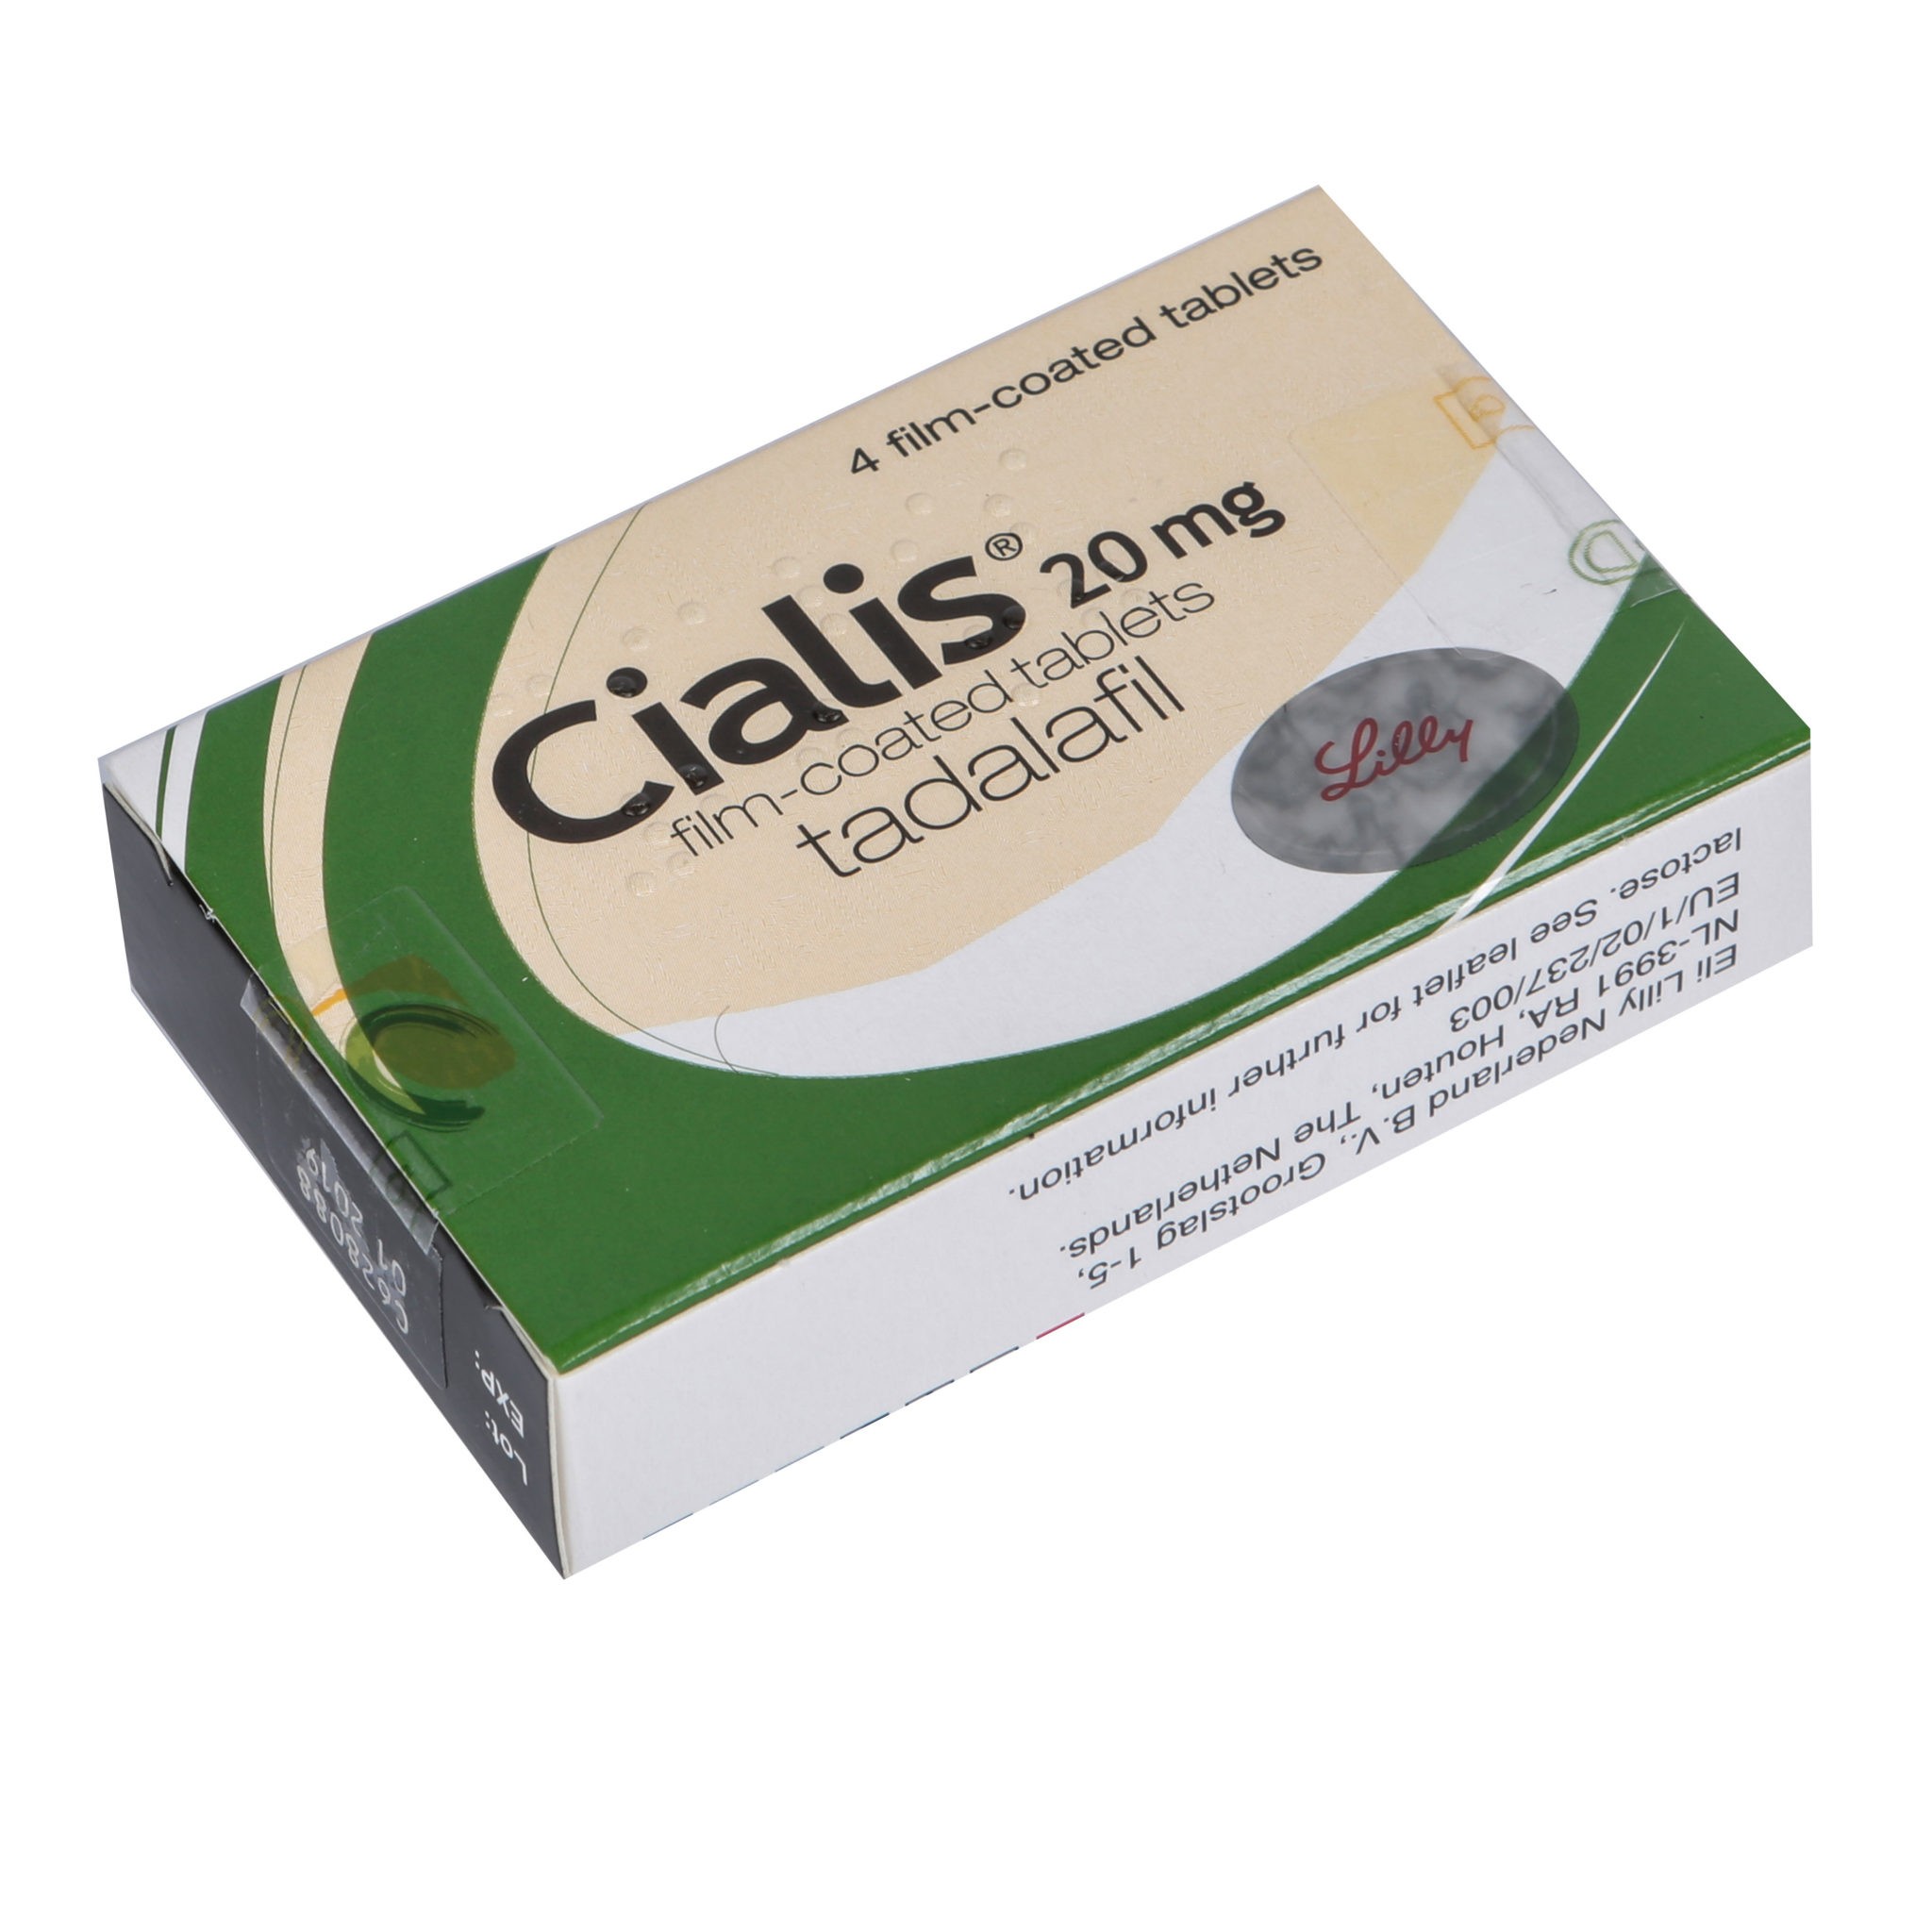 Cialis 20mg Tablets (32 Tablets)